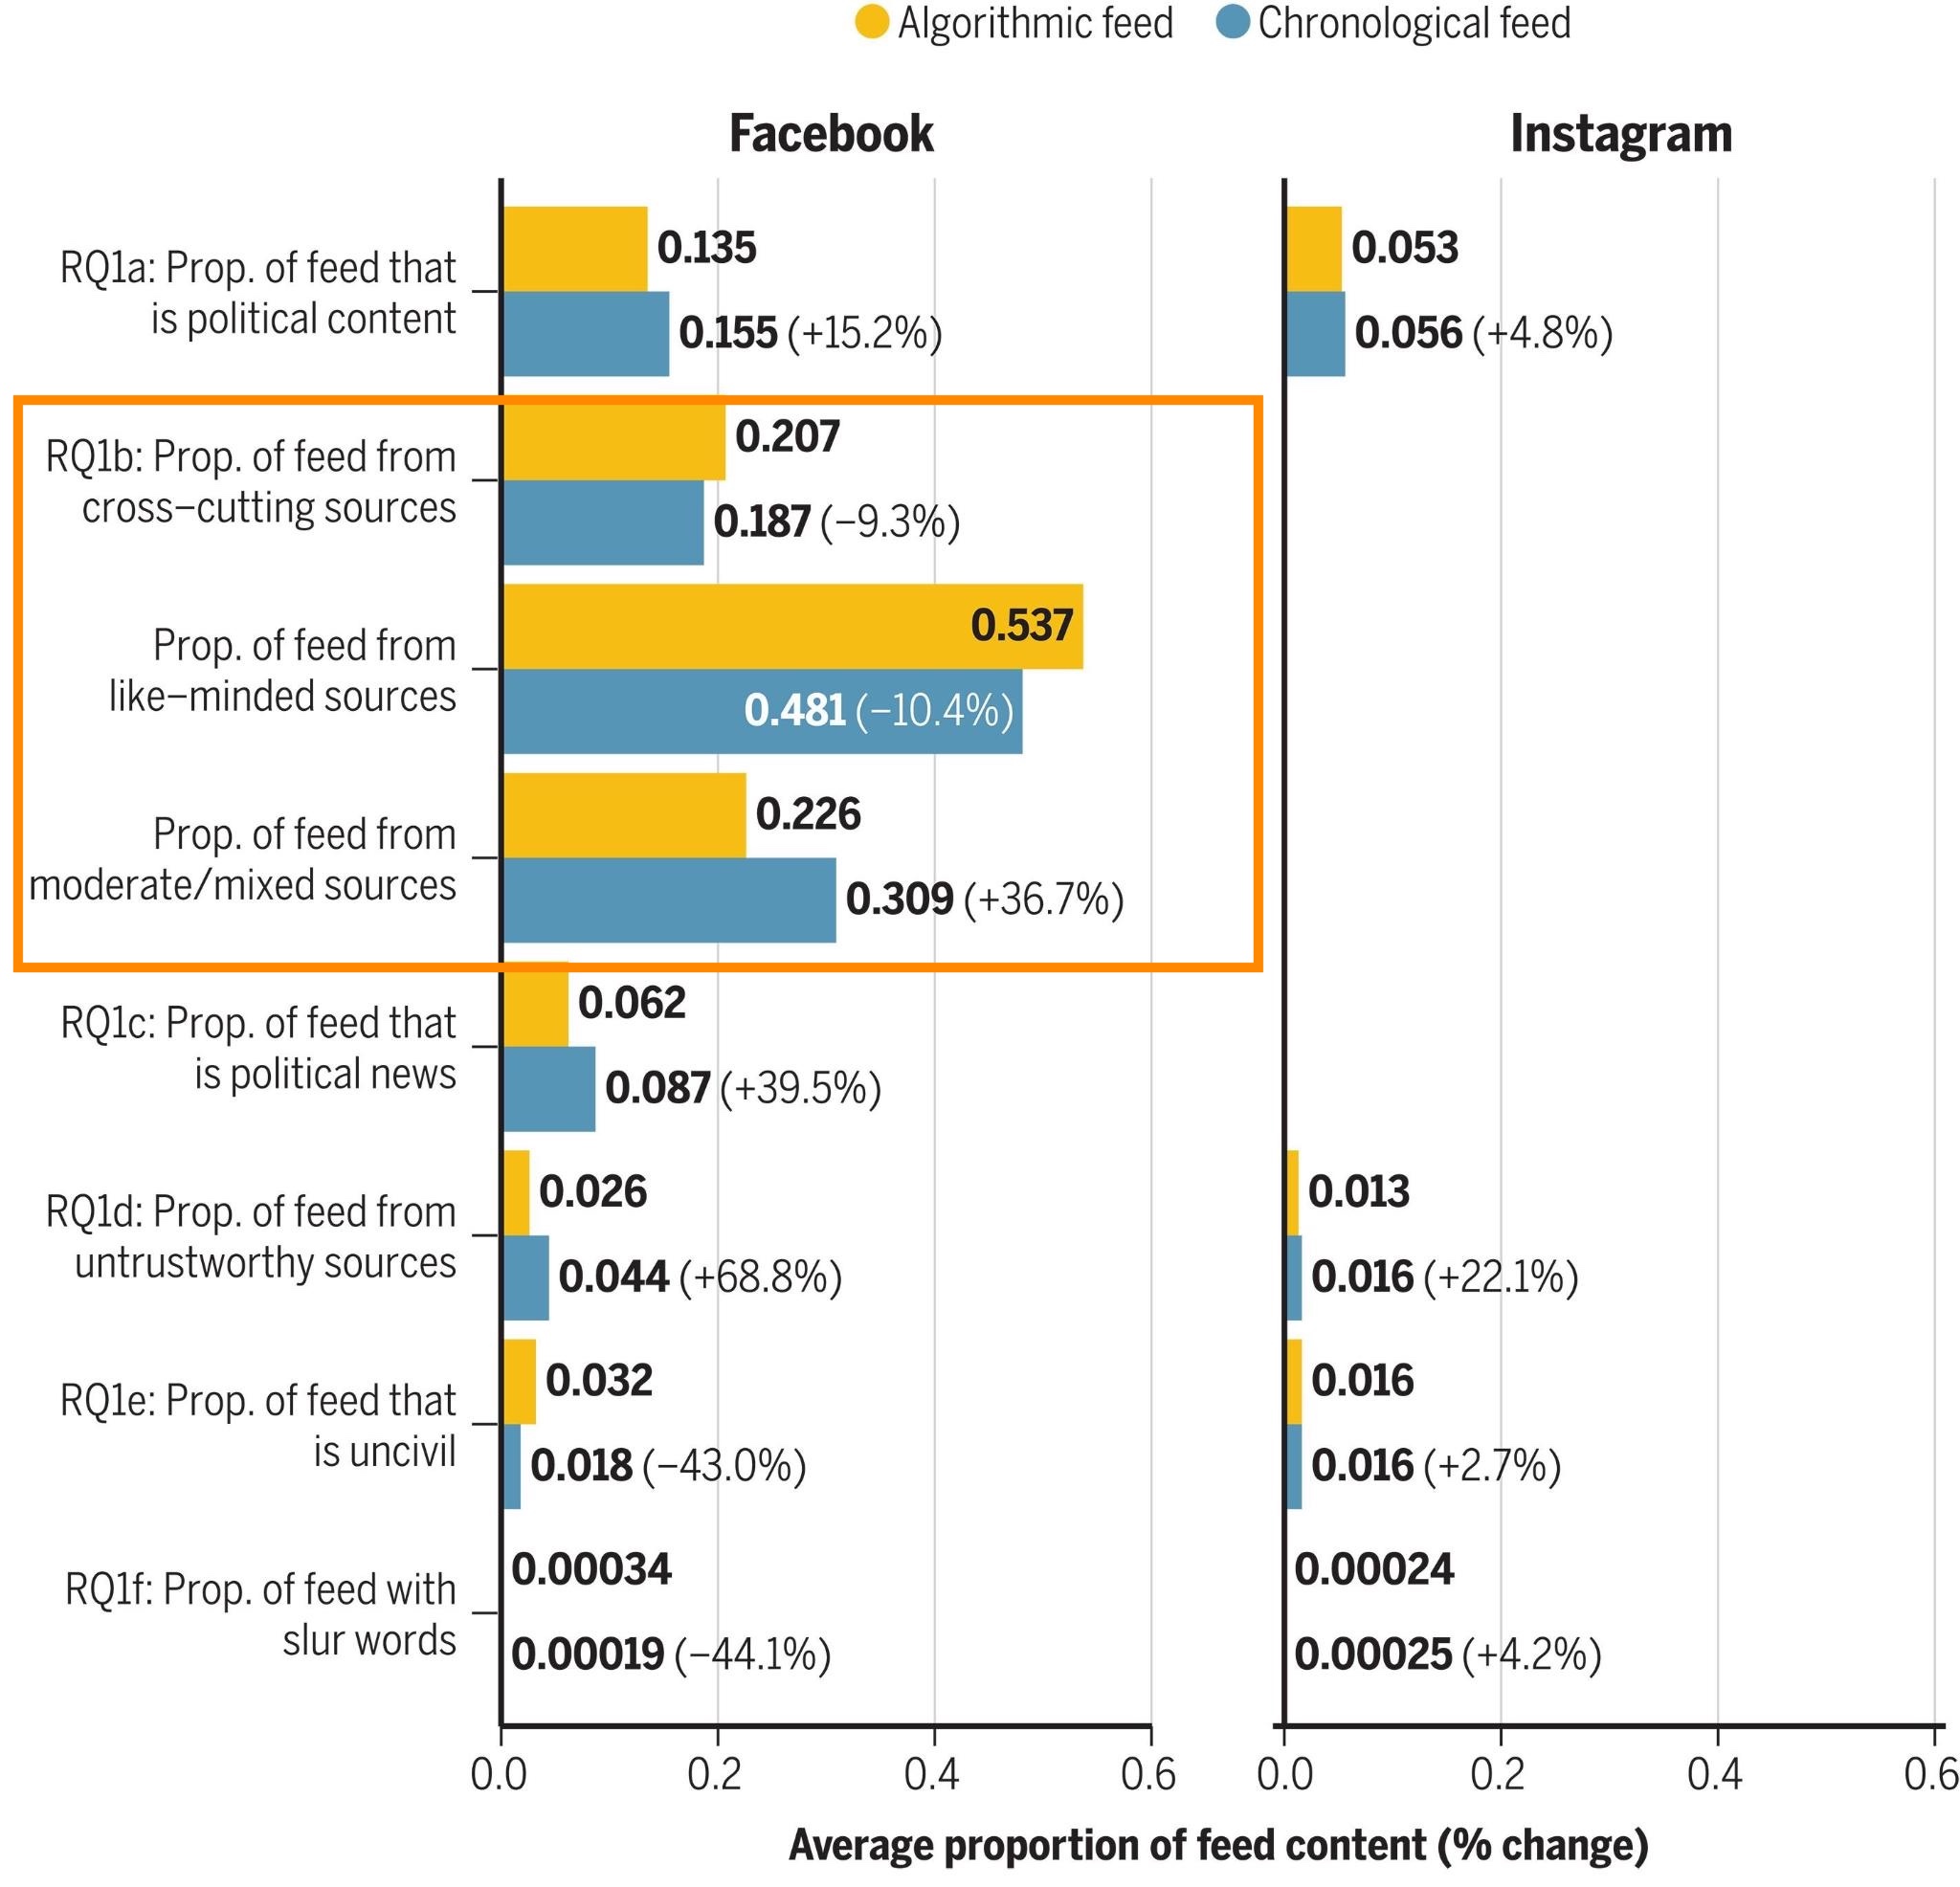 Figure 2 from Guess et al 2023: Compared to a reverse chronologically-ranked feed, FB&rsquo;s ranking system induces a proportionally more exposure to &ldquo;like-minded&rdquo; sources but also more to cross-cutting sources, defined at the level of the entity posting.